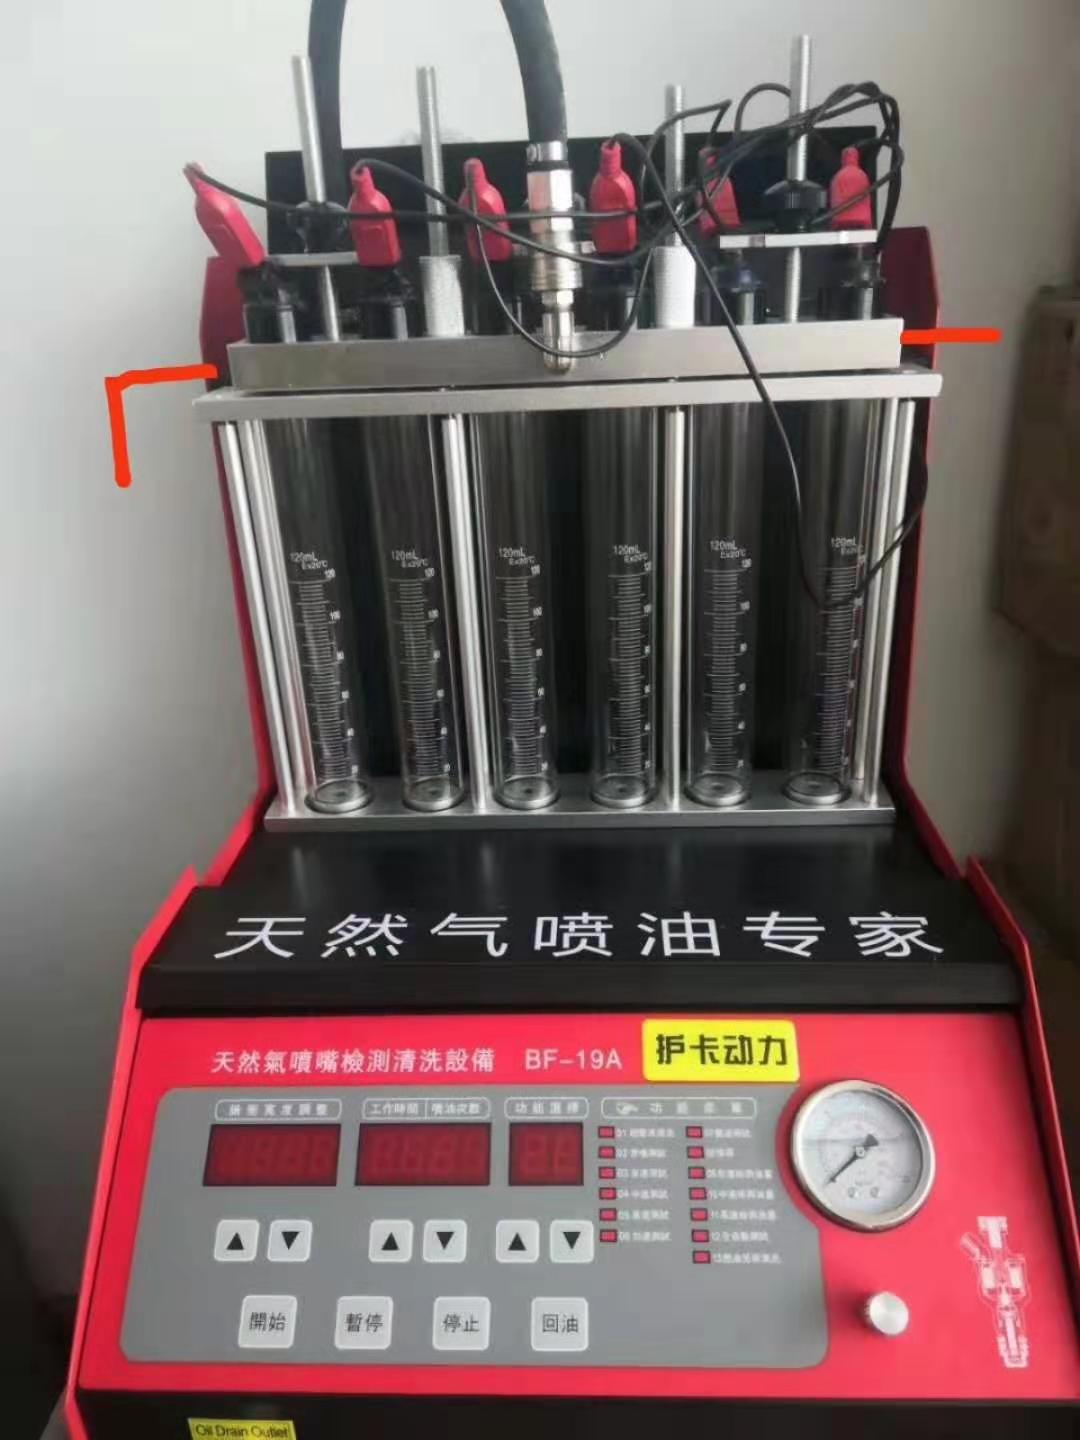 New Developed Testing Machine for GAS Injectors 